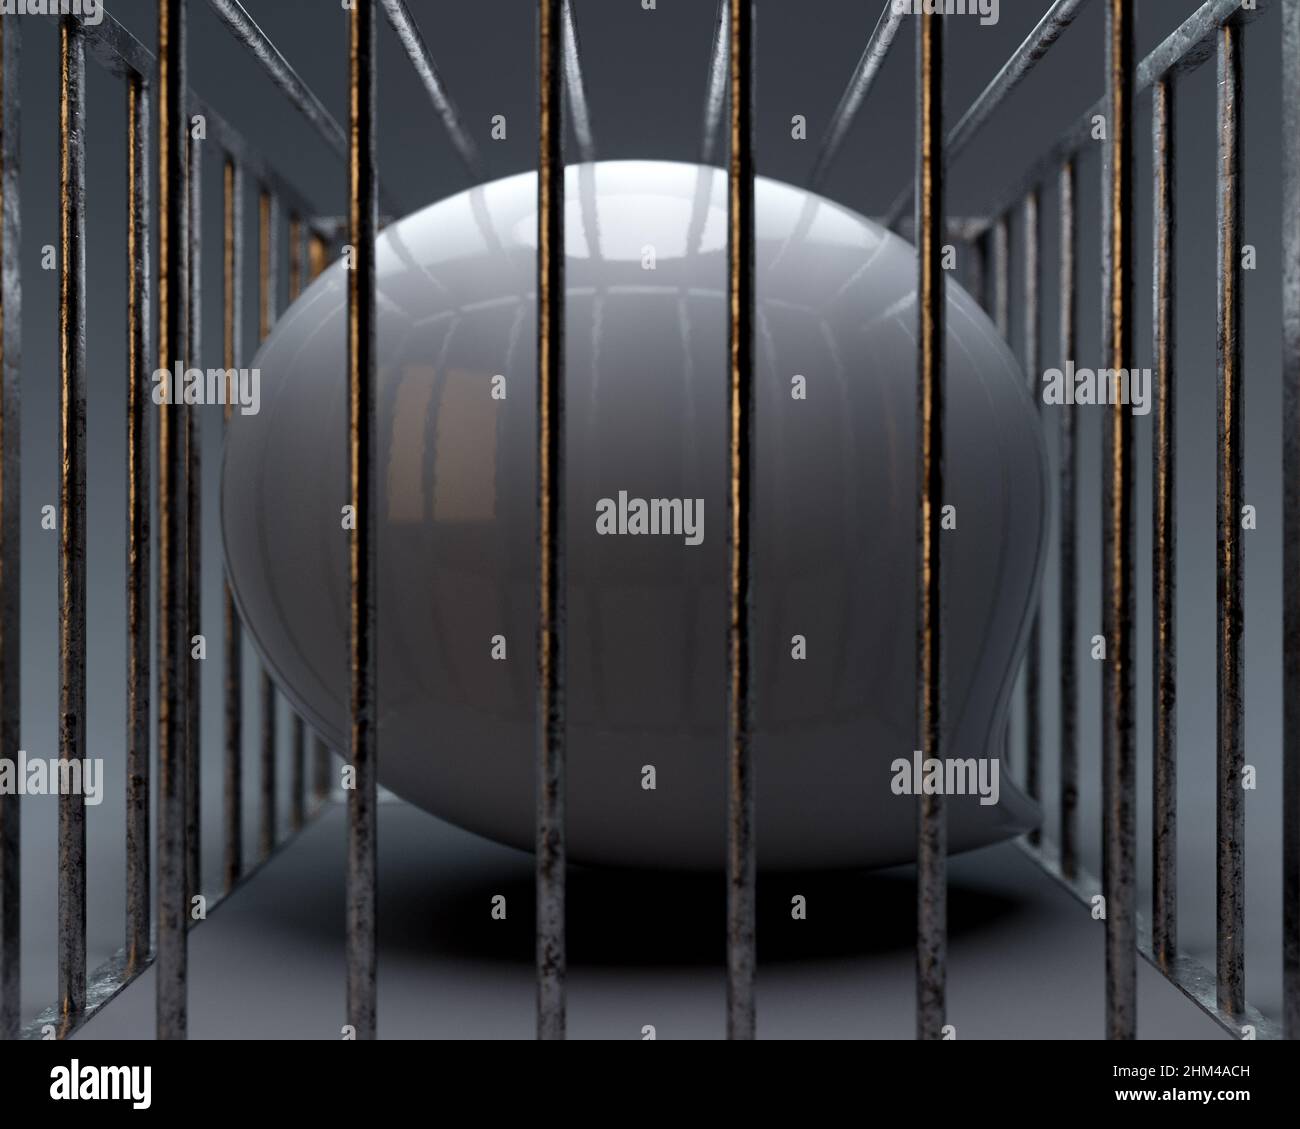 A concept showing a white reflective speech bubble imprisoned in a square steel cage depicting censorship on an isolated dark background - 3D render Stock Photo